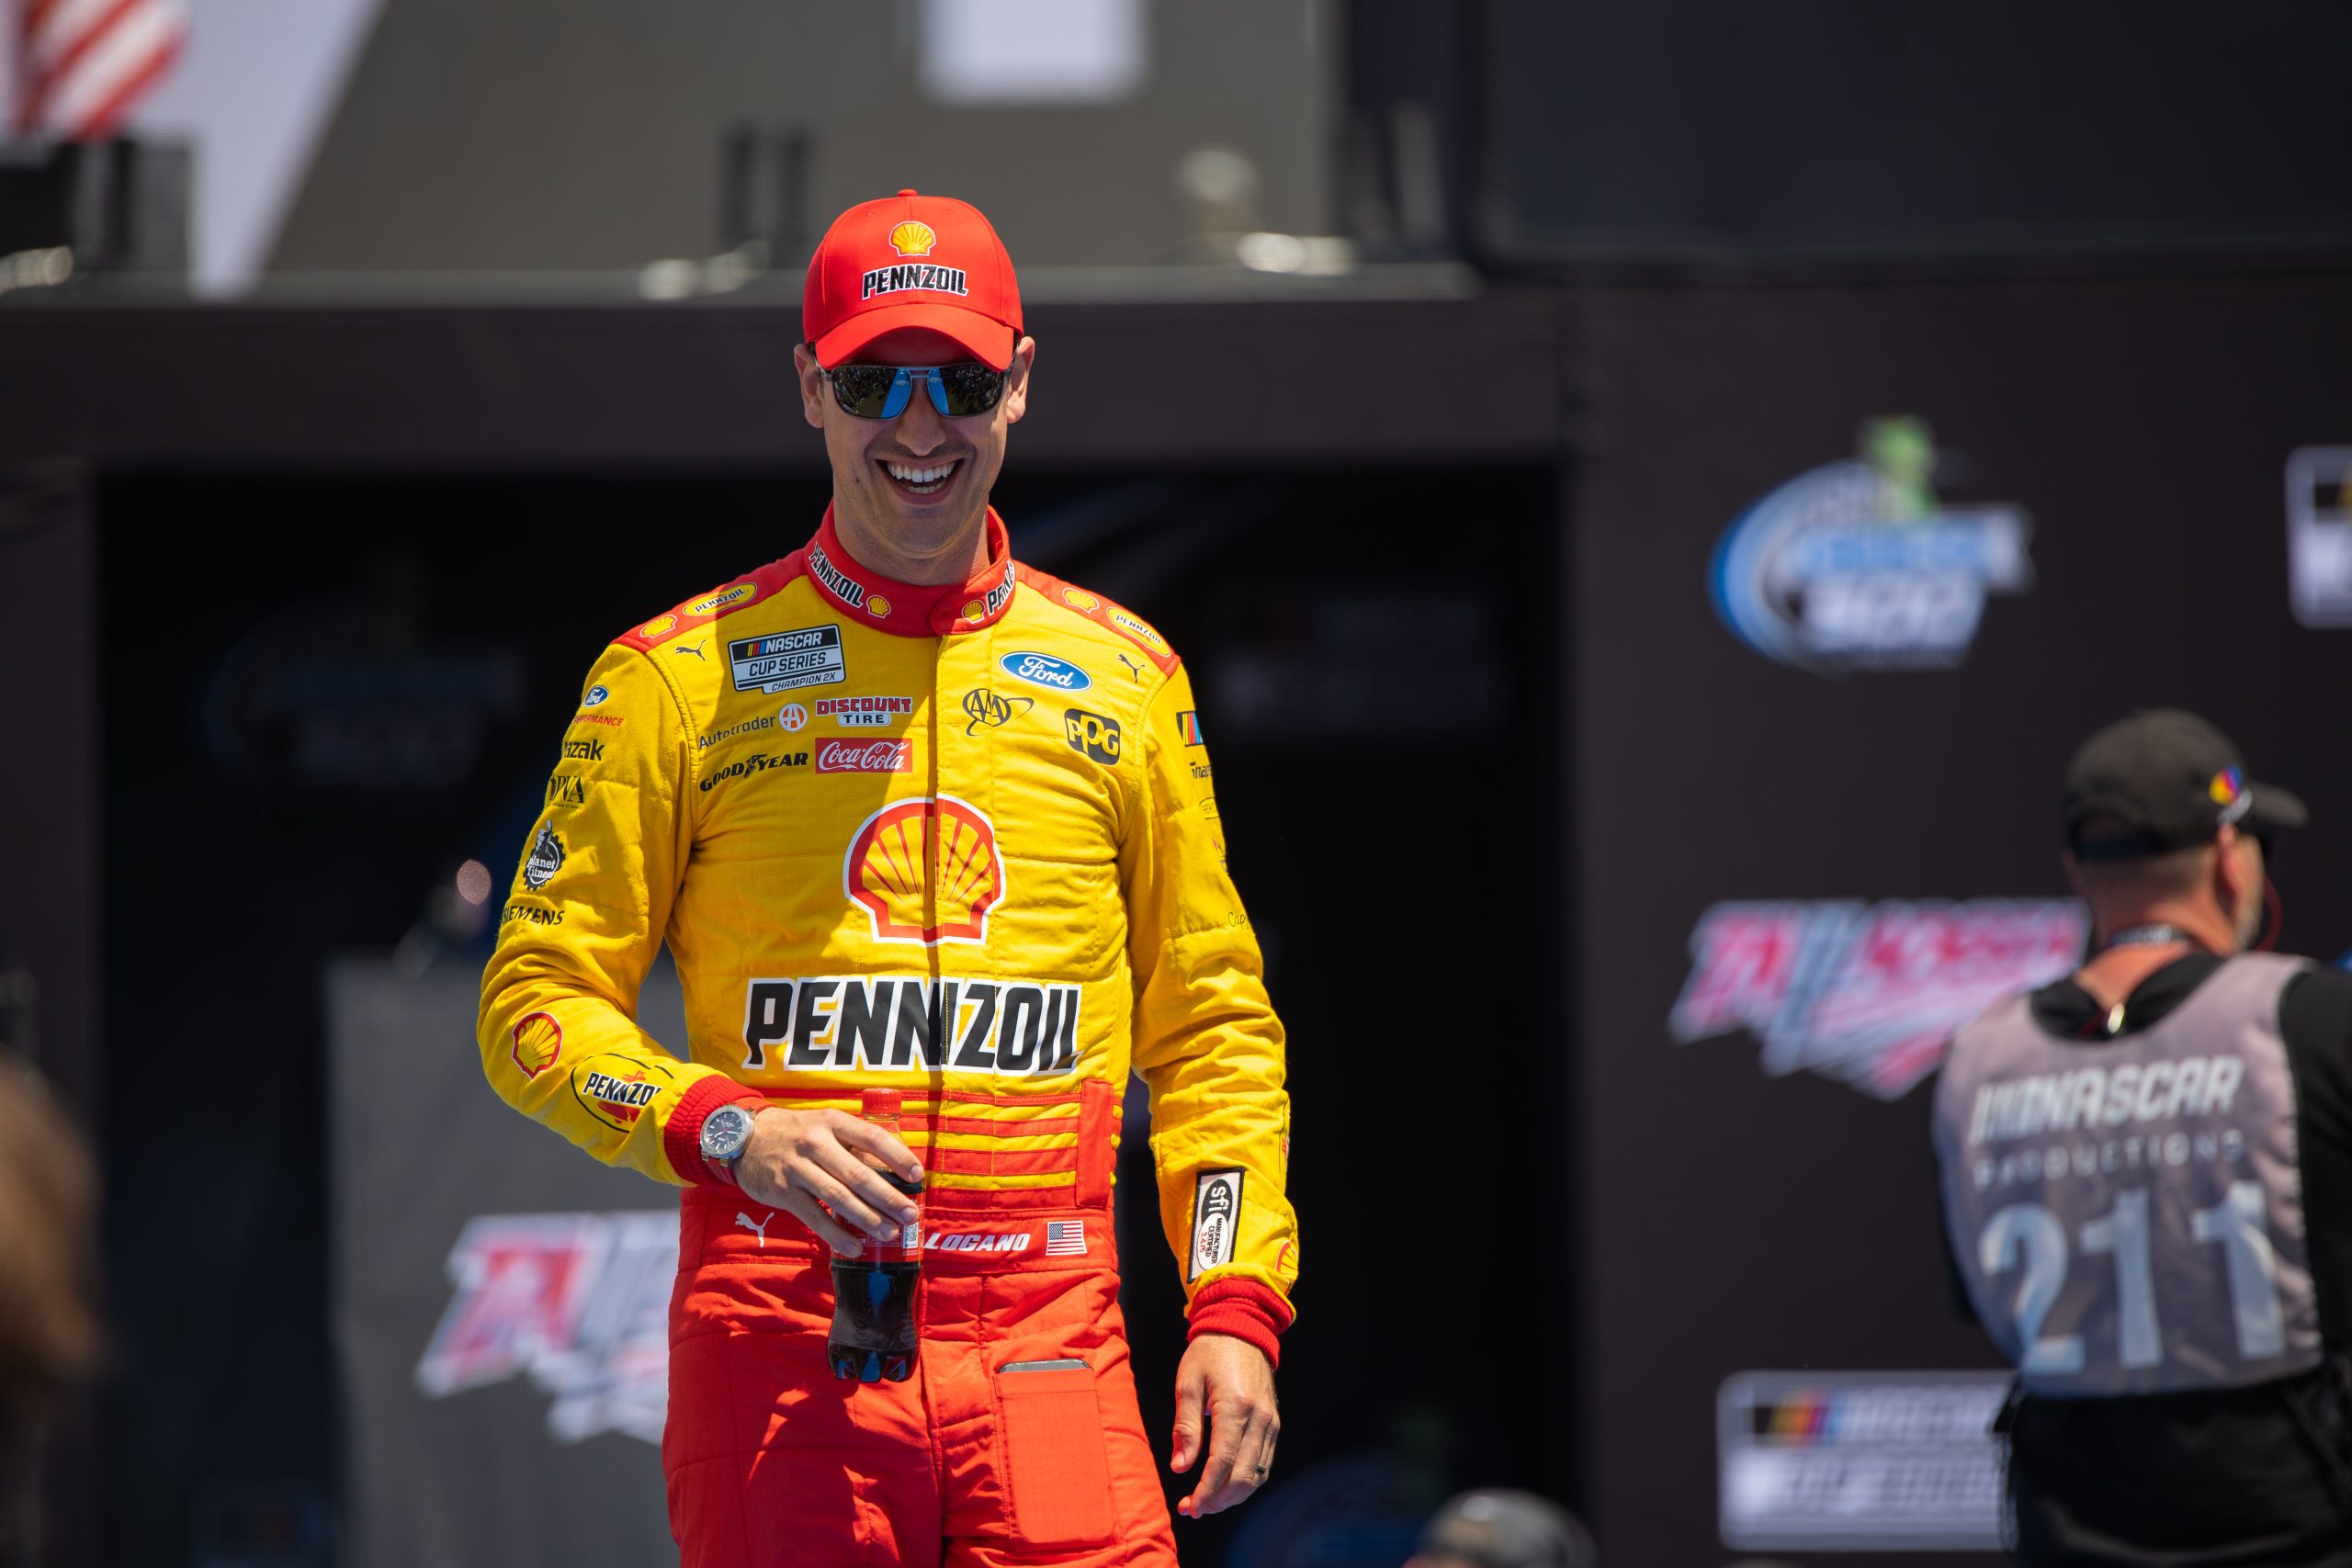 Joey Logano hones in on a challenging 400-miler at Dover. (Photo: RIley Thompson | The Podium Finish)